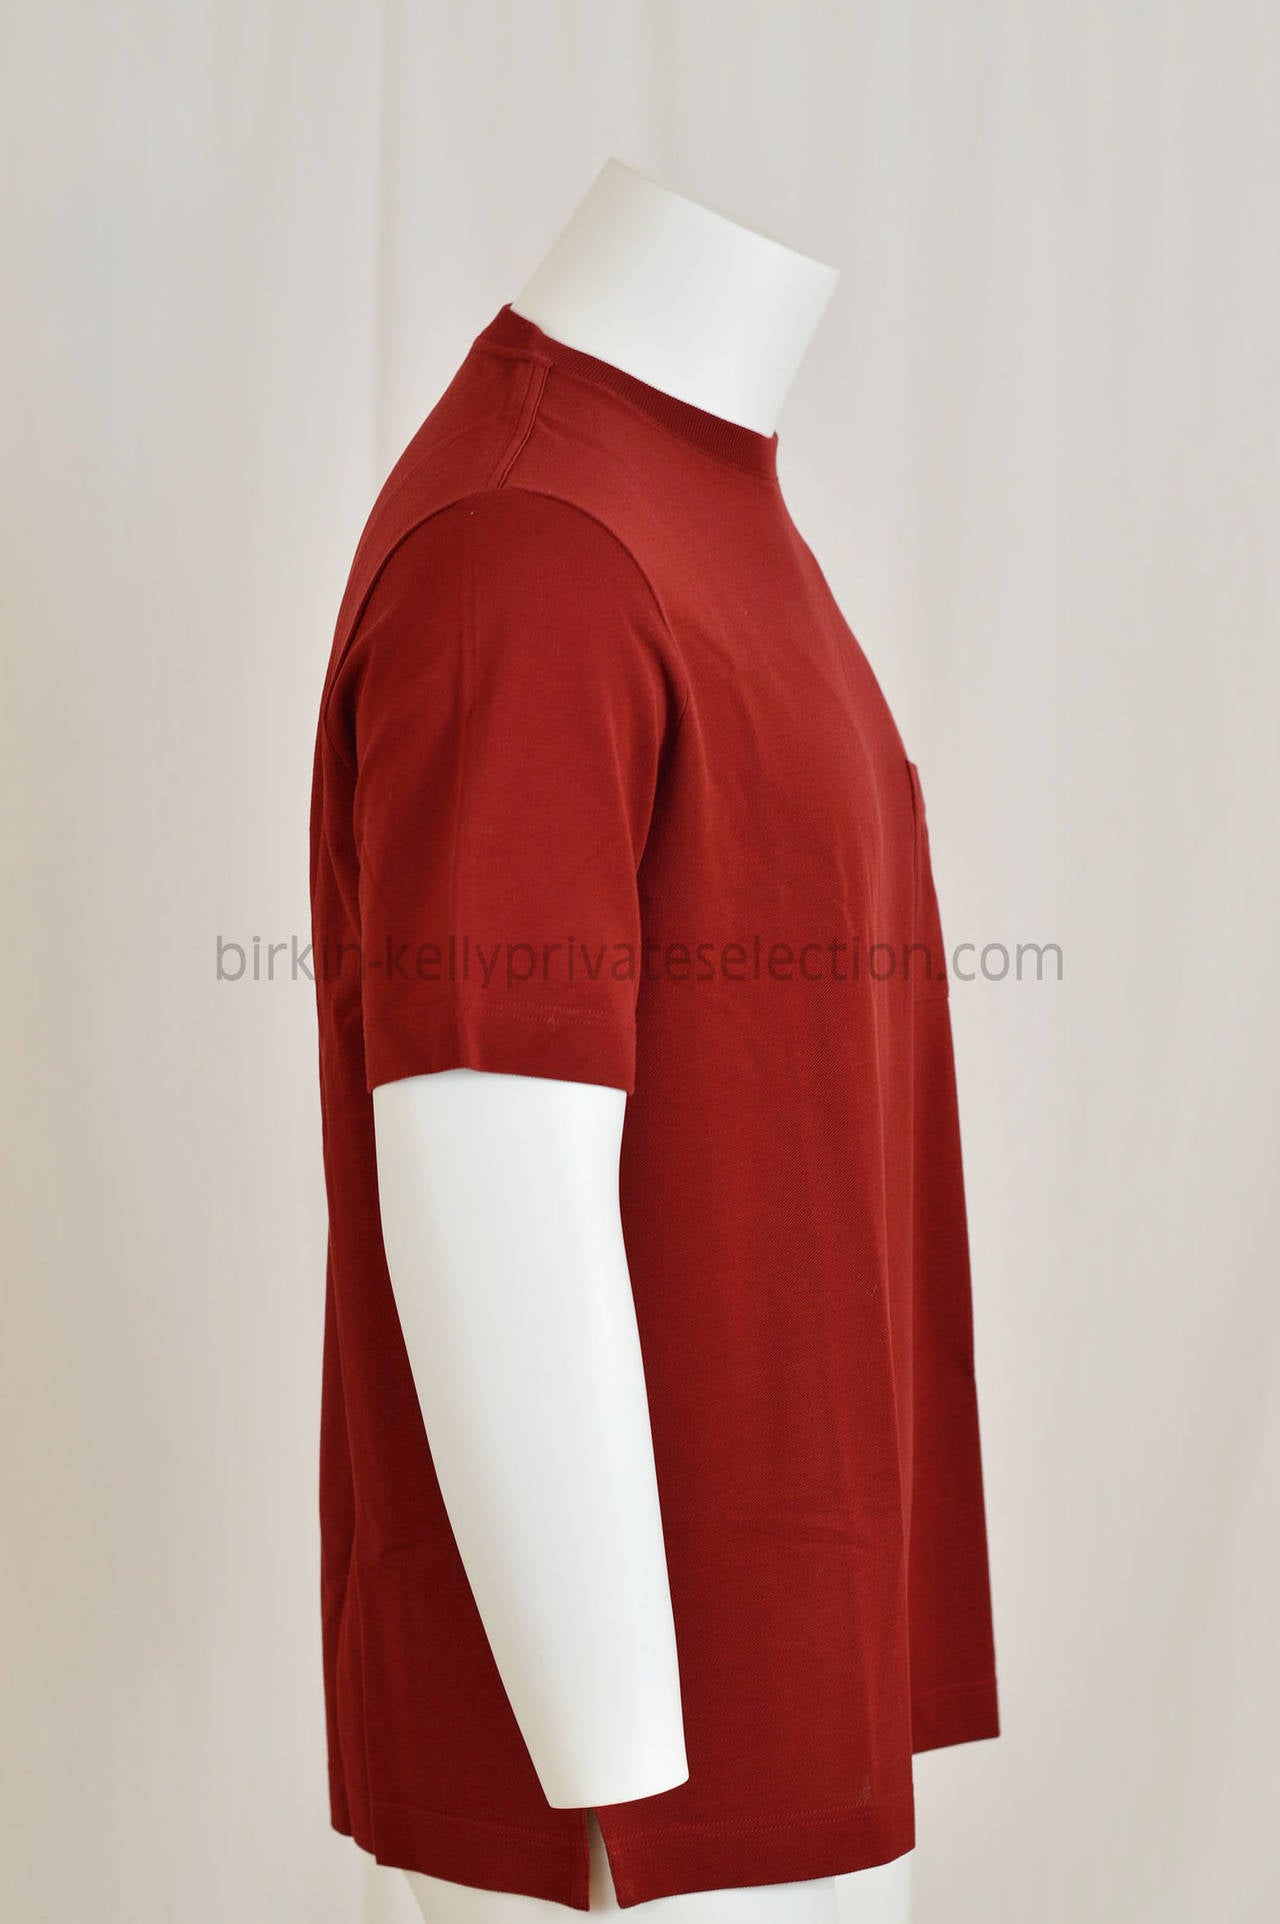 HERMES T-Shirt Ras du Cou Cotton Pique L RED 2015.

Pre-owned and never used.

Bought it in Hermes store in 2015.

Composition; 100% Cotton.

Size; L.

Color; ROUGE.

Model; Ras du Cou.

-Original Invoice.

-Shipment and Insurance,